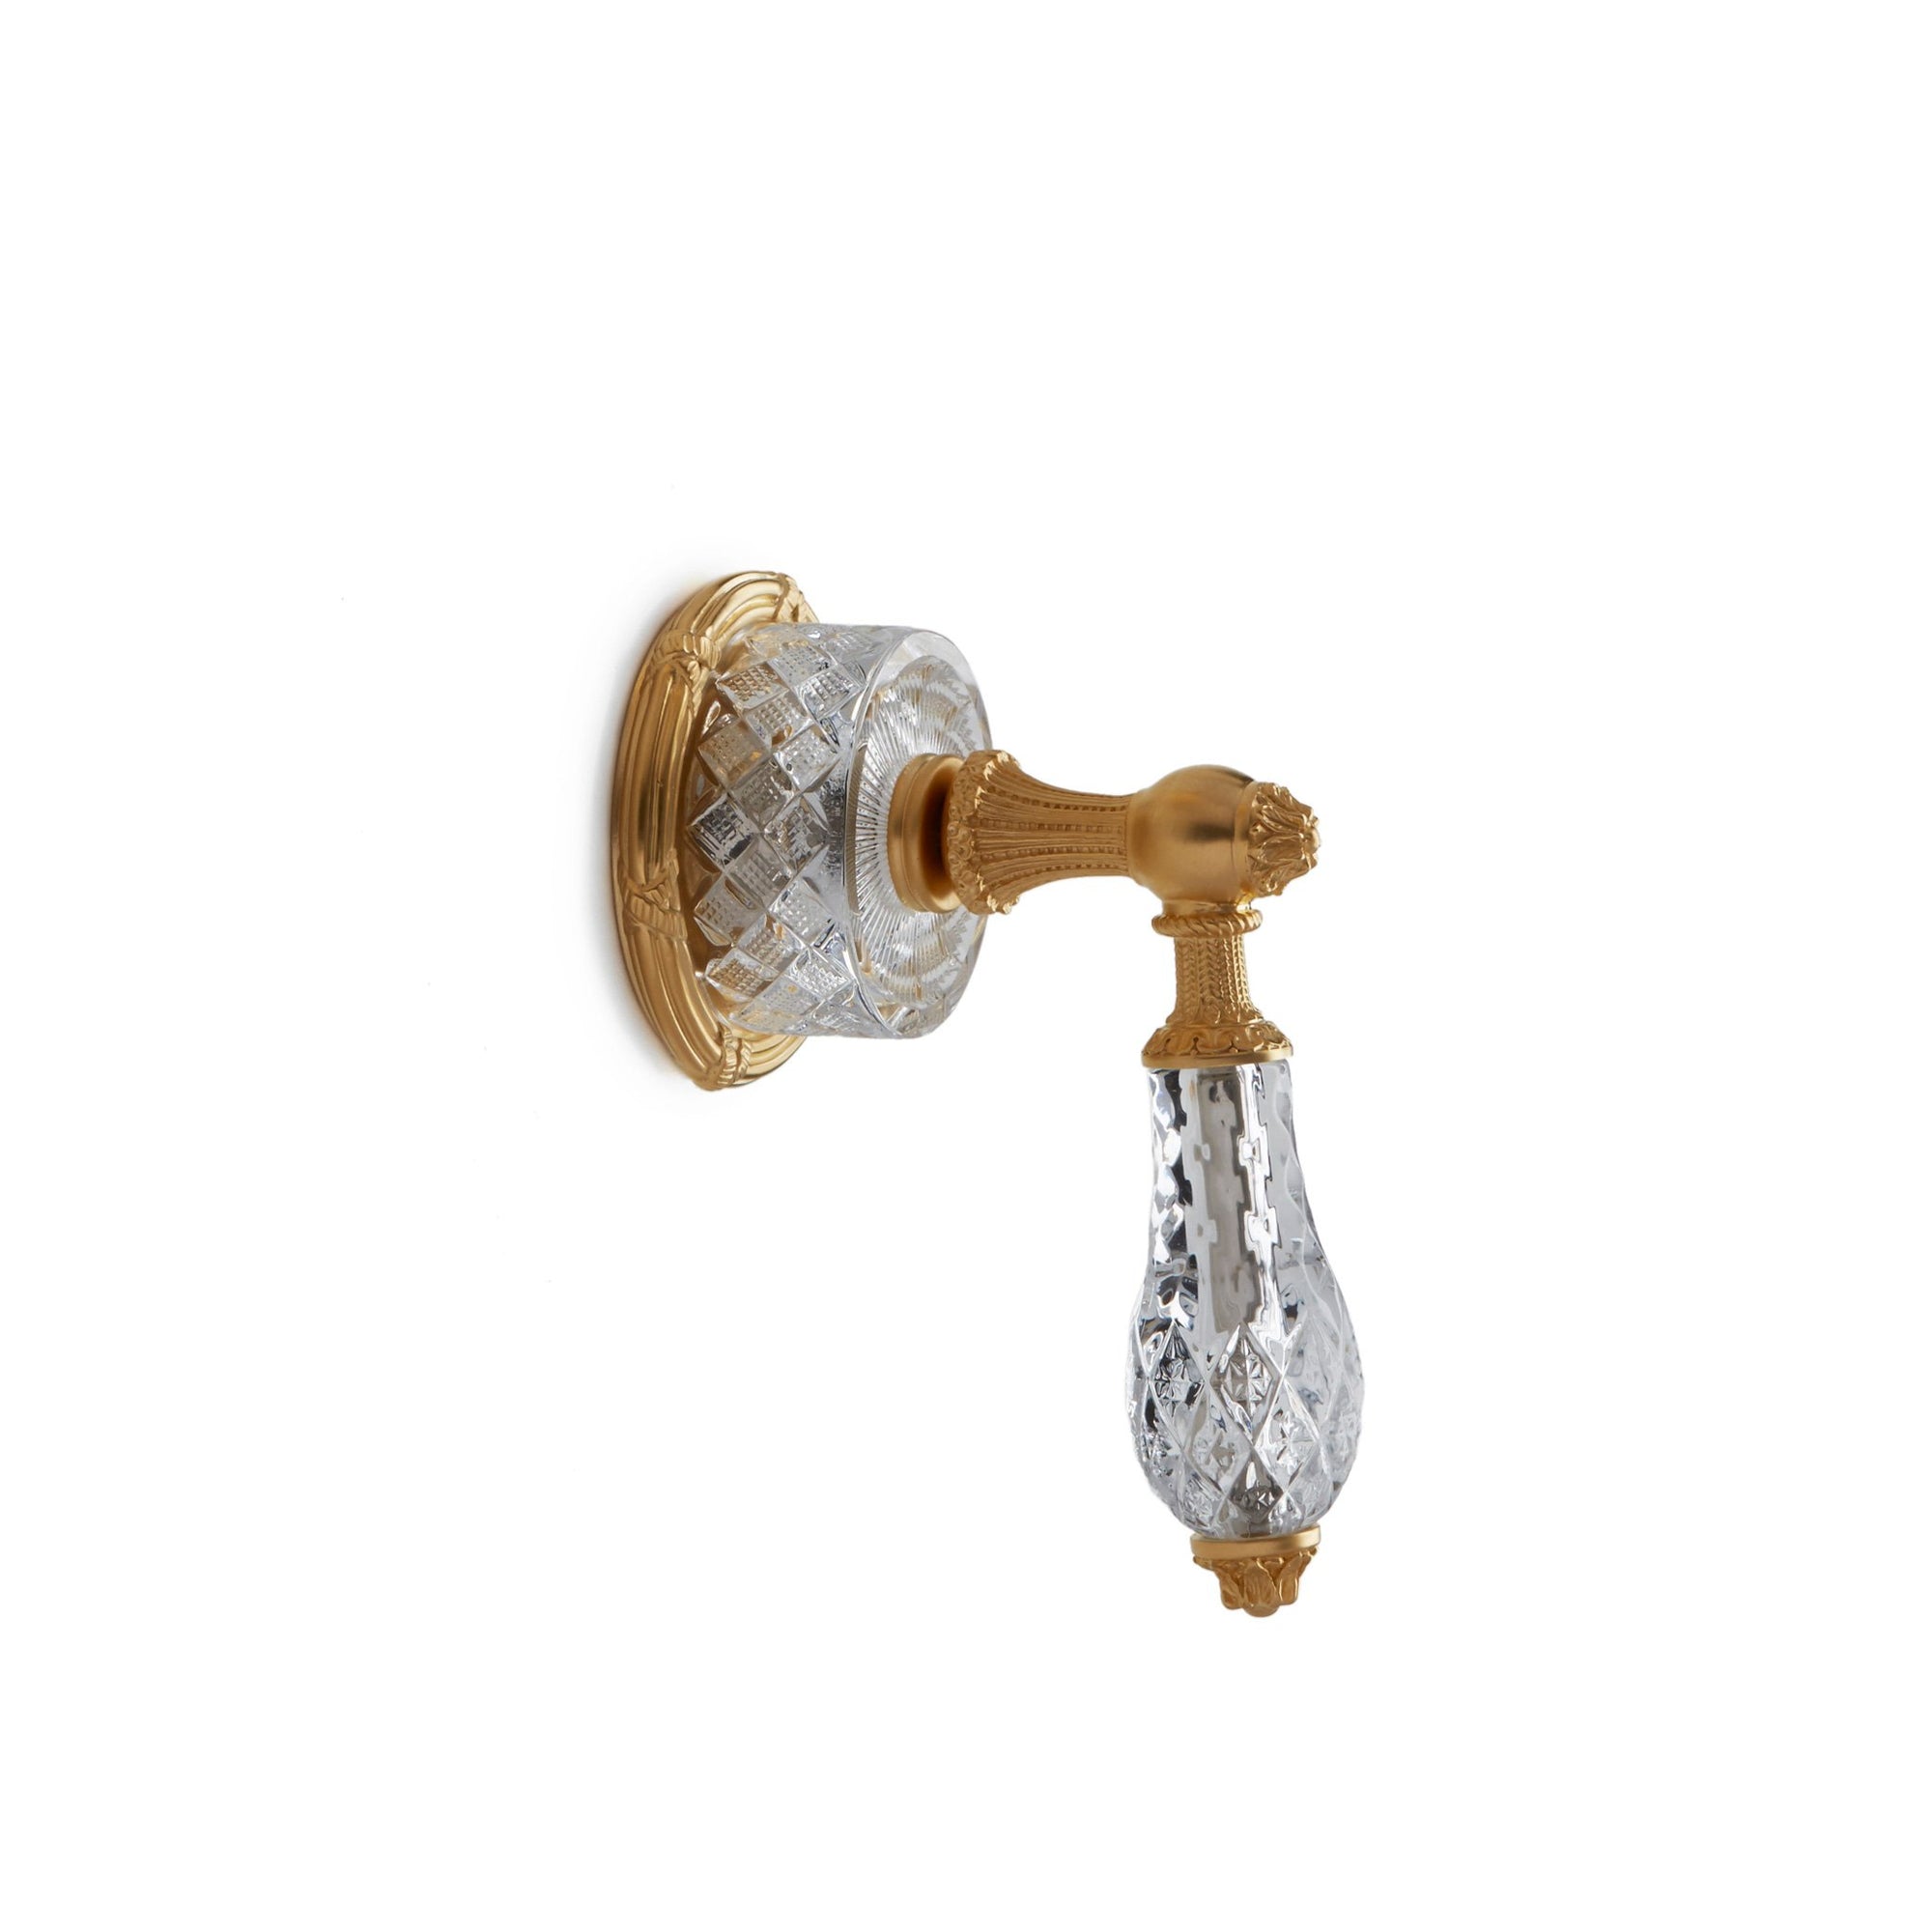 0914LV-ESC-GP Sherle Wagner International Cut Crystal Empire Lever Volume Control and Diverter Trim in Gold Plate metal finish